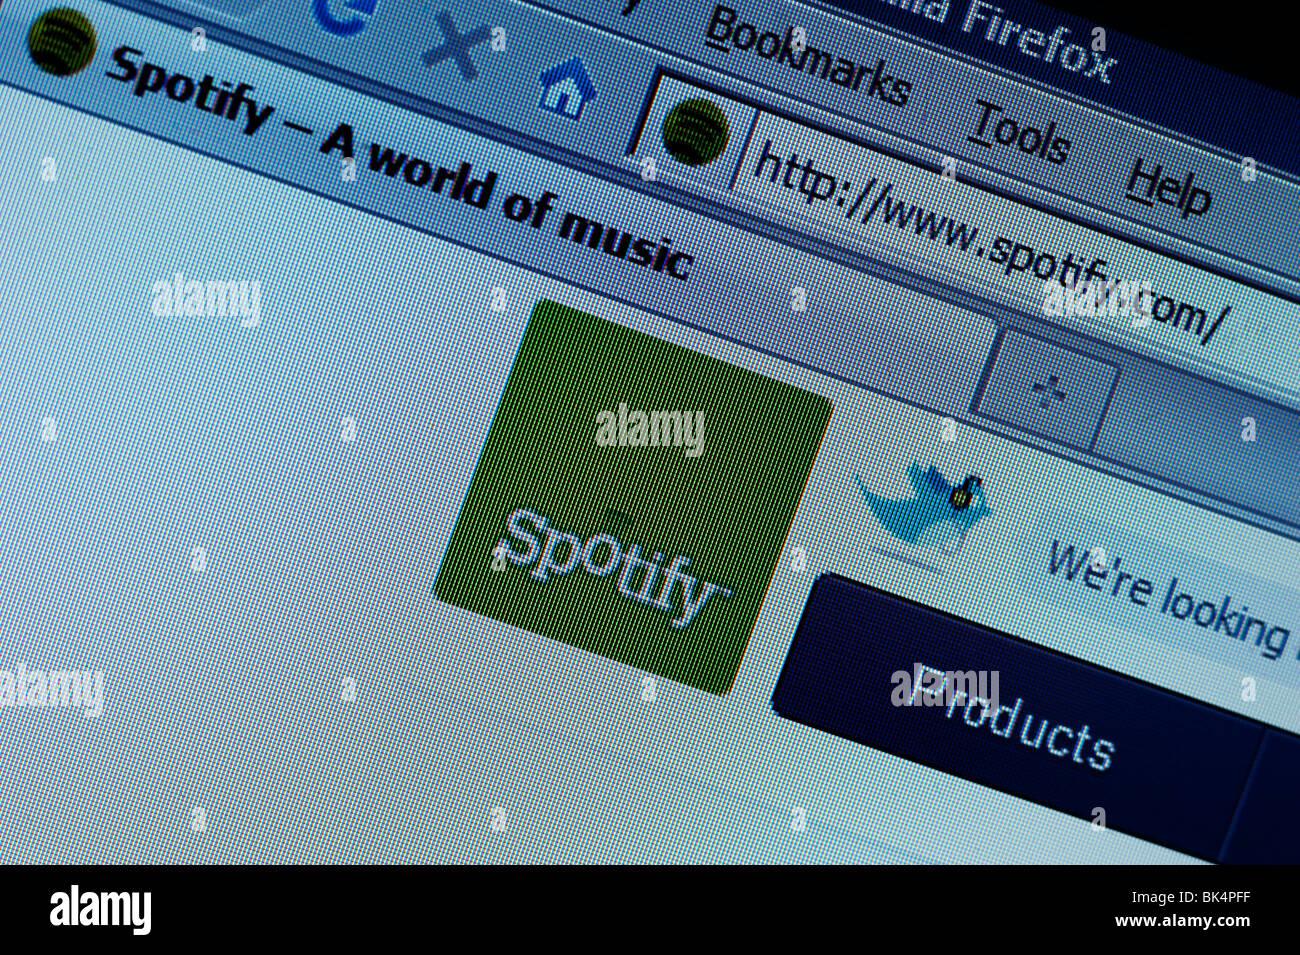 Image of a Spotify web page with the Spotify logo Stock Photo